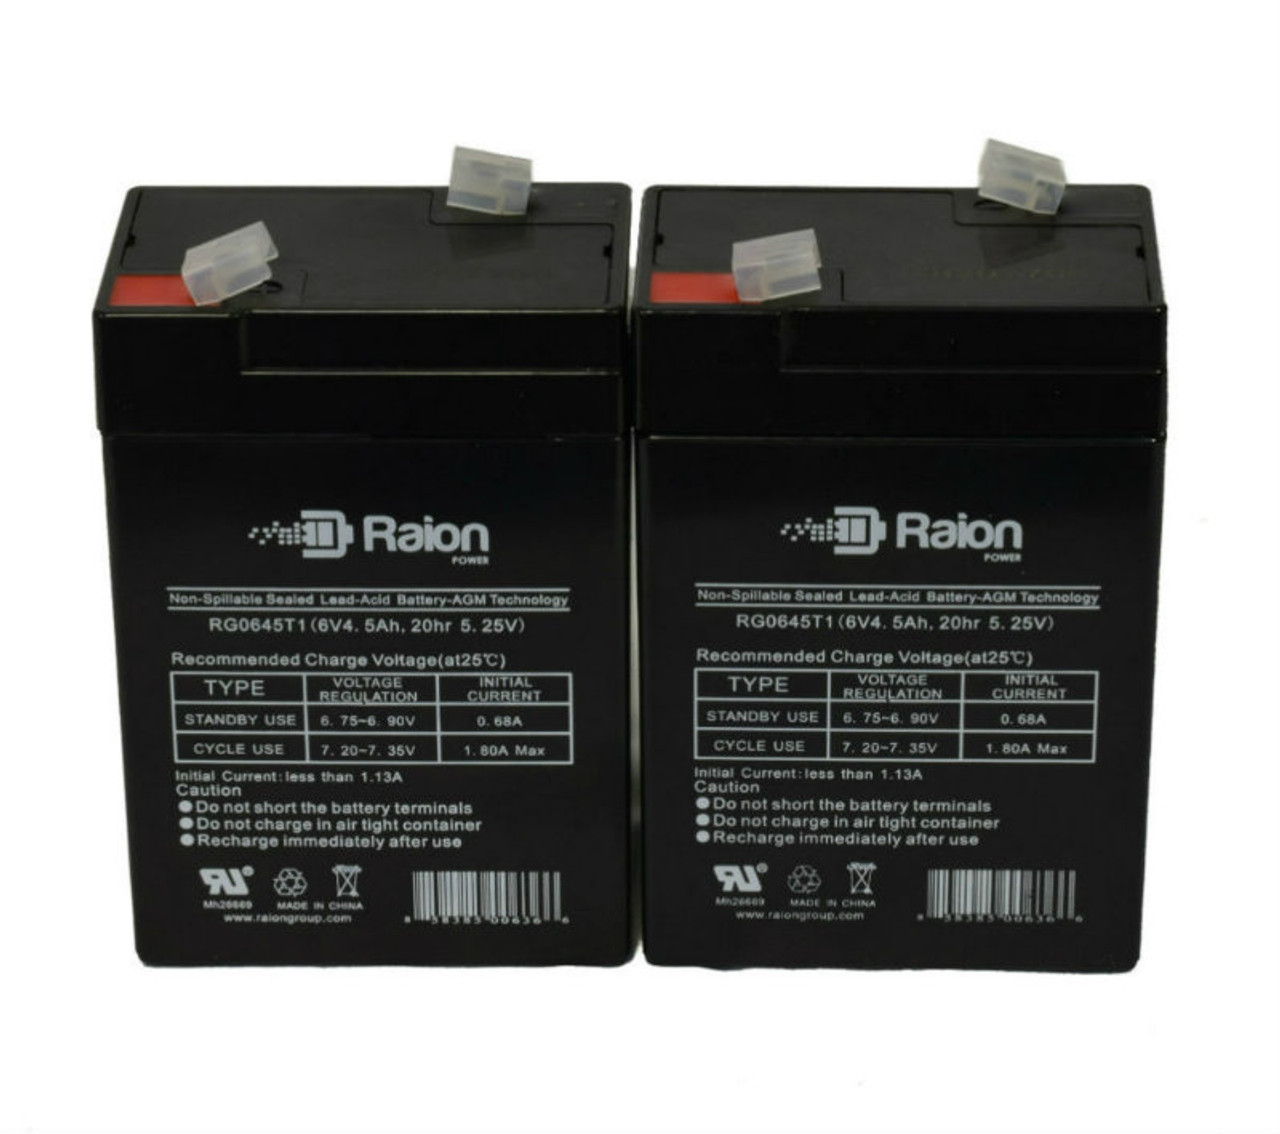 Raion Power RG0645T1 6V 4.5Ah Replacement Medical Equipment Battery for McGaw 821 Intelligent - 2 Pack